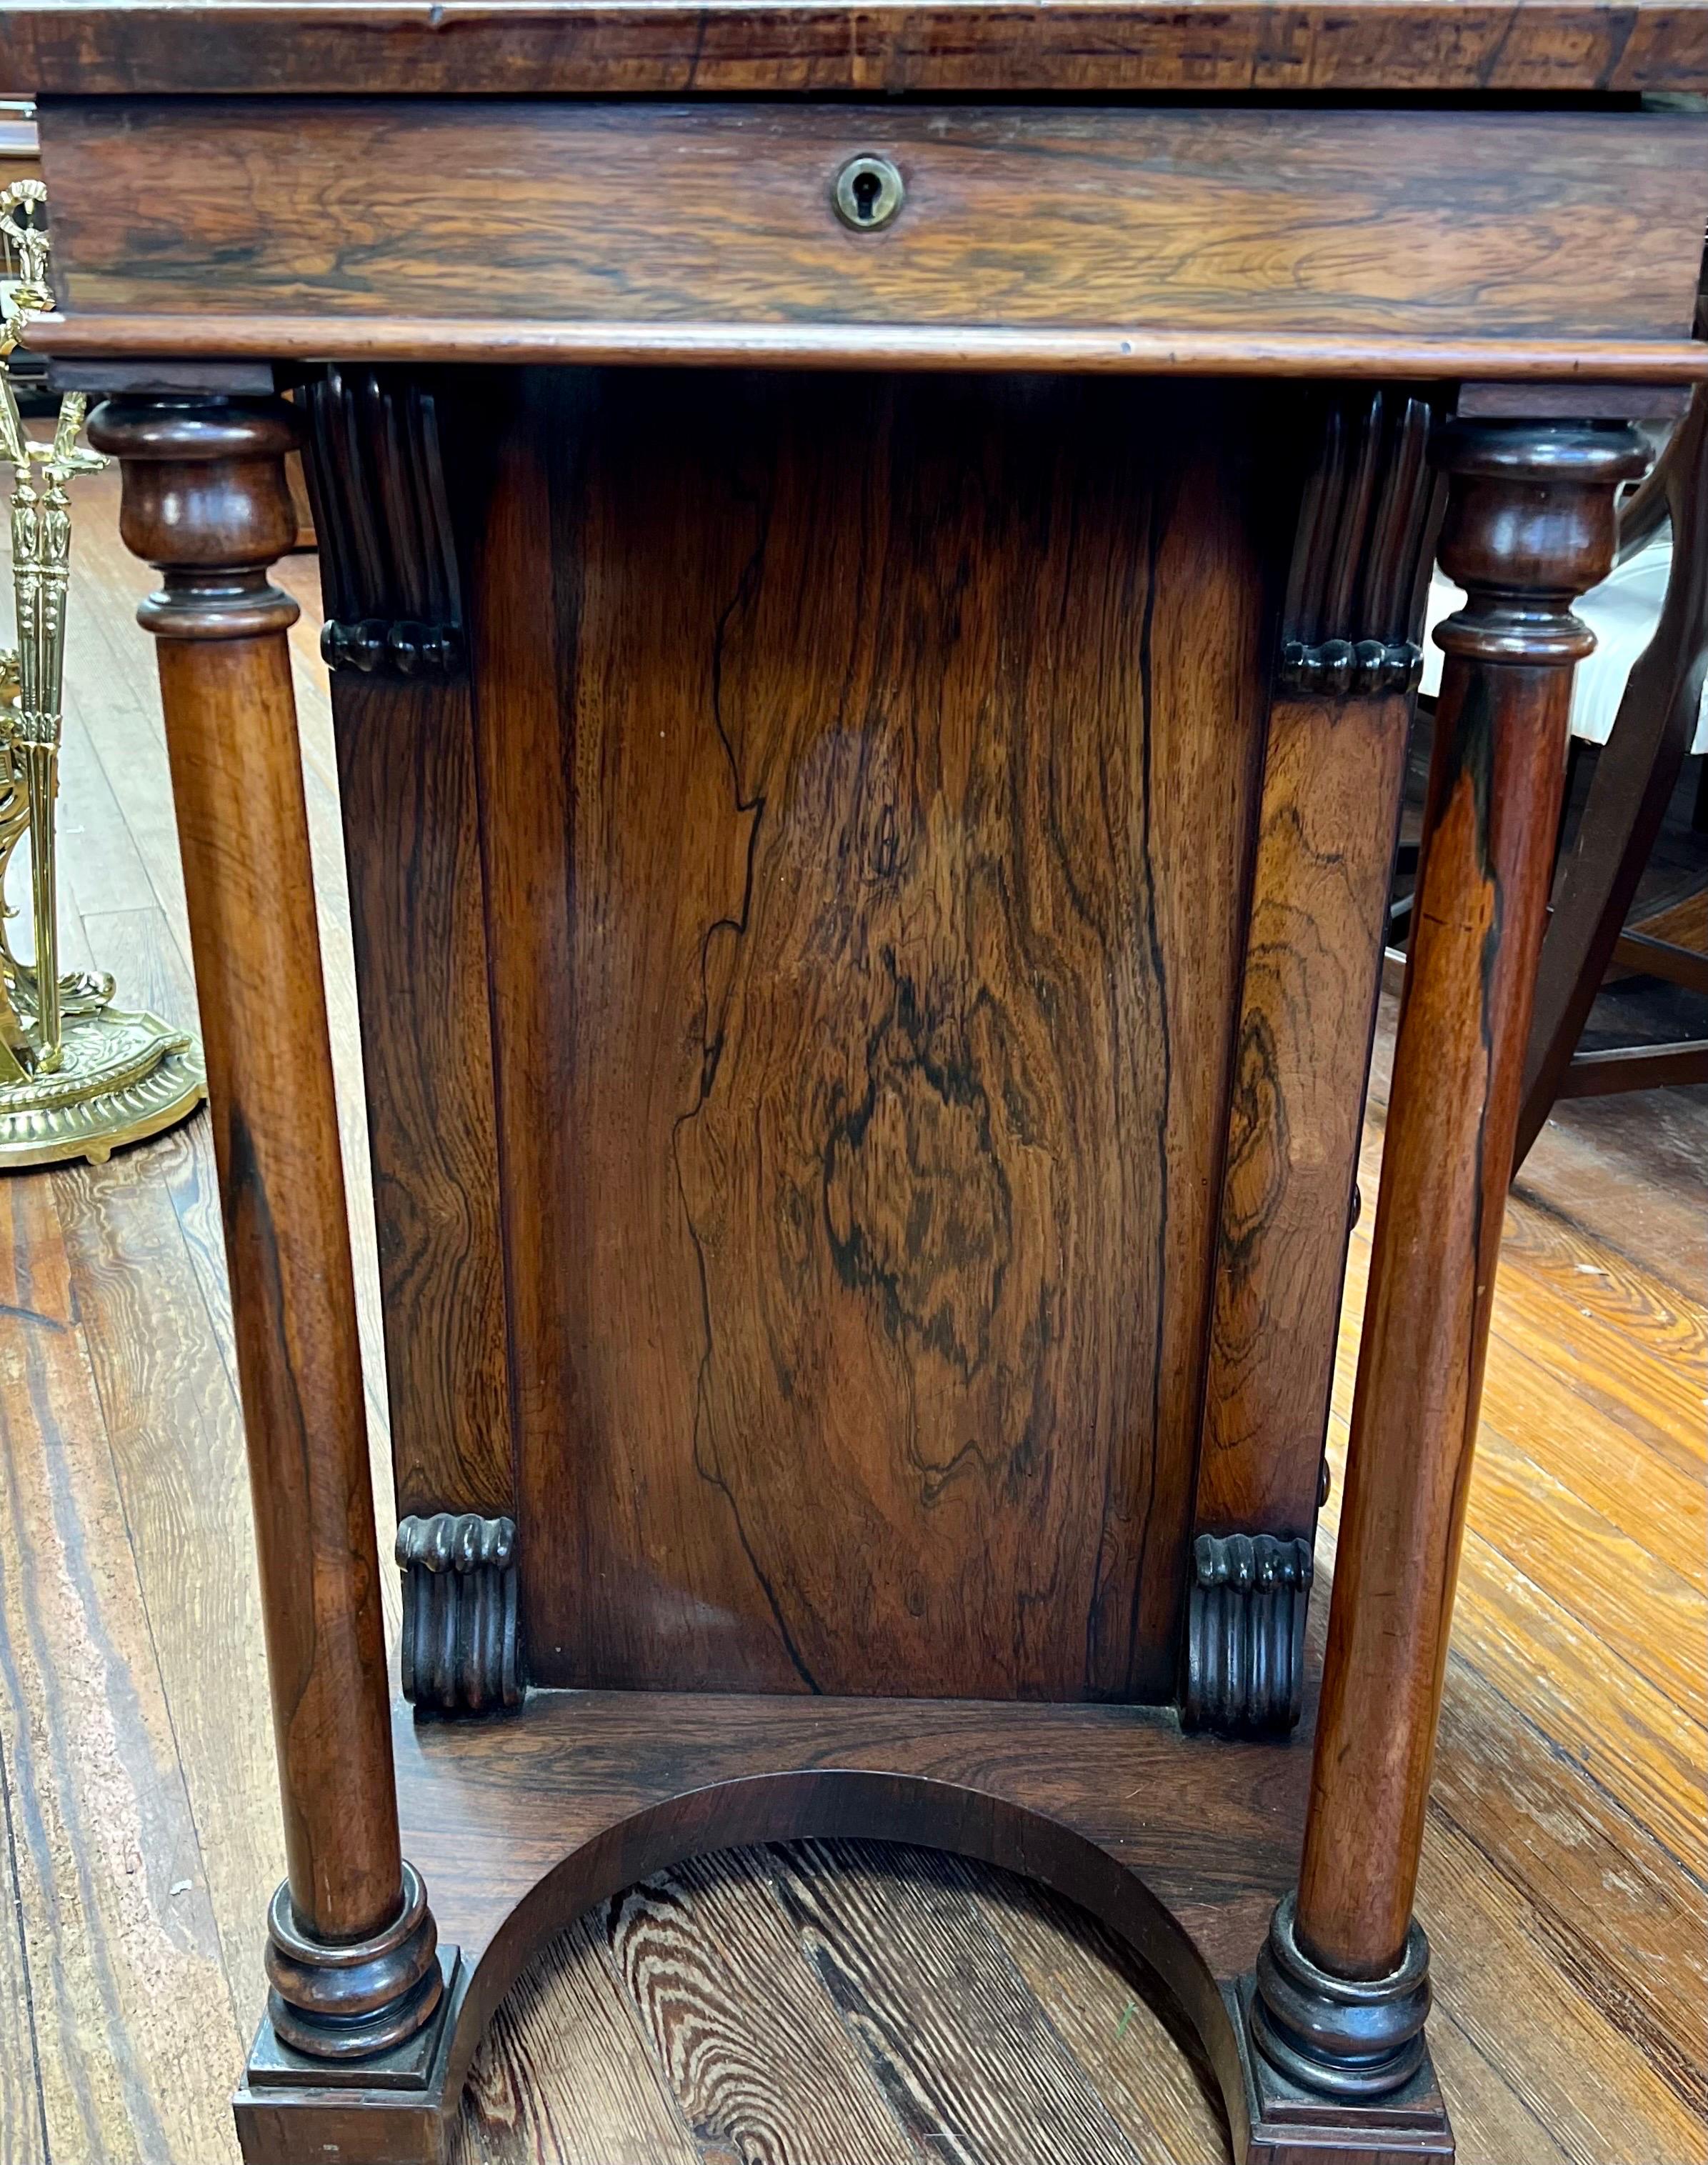 This wonderful early 19th century Antique English Rosewood and ebonized Davenport or Ship Captain's Desk is one of the finest we've had in recent years. Davenports or Ship Captain's Desks are so-named originally for a Captain Davenport for whom a